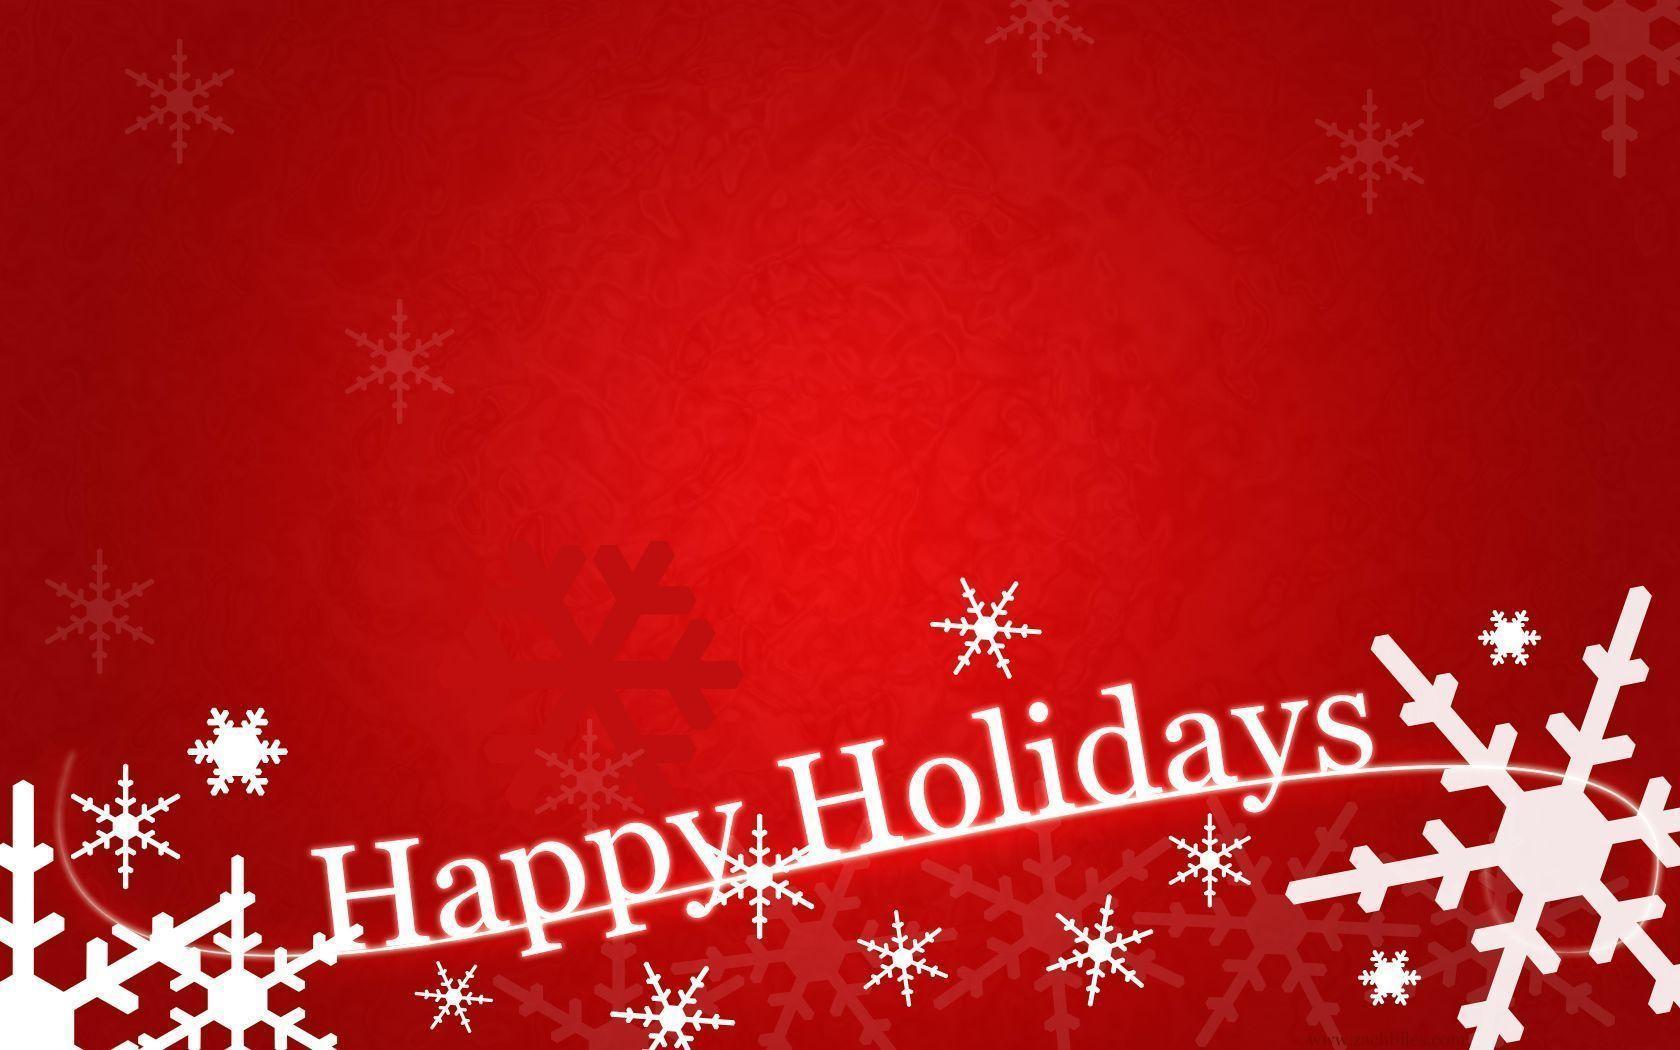 Silver Holidays Background 18842 1920x1200 px